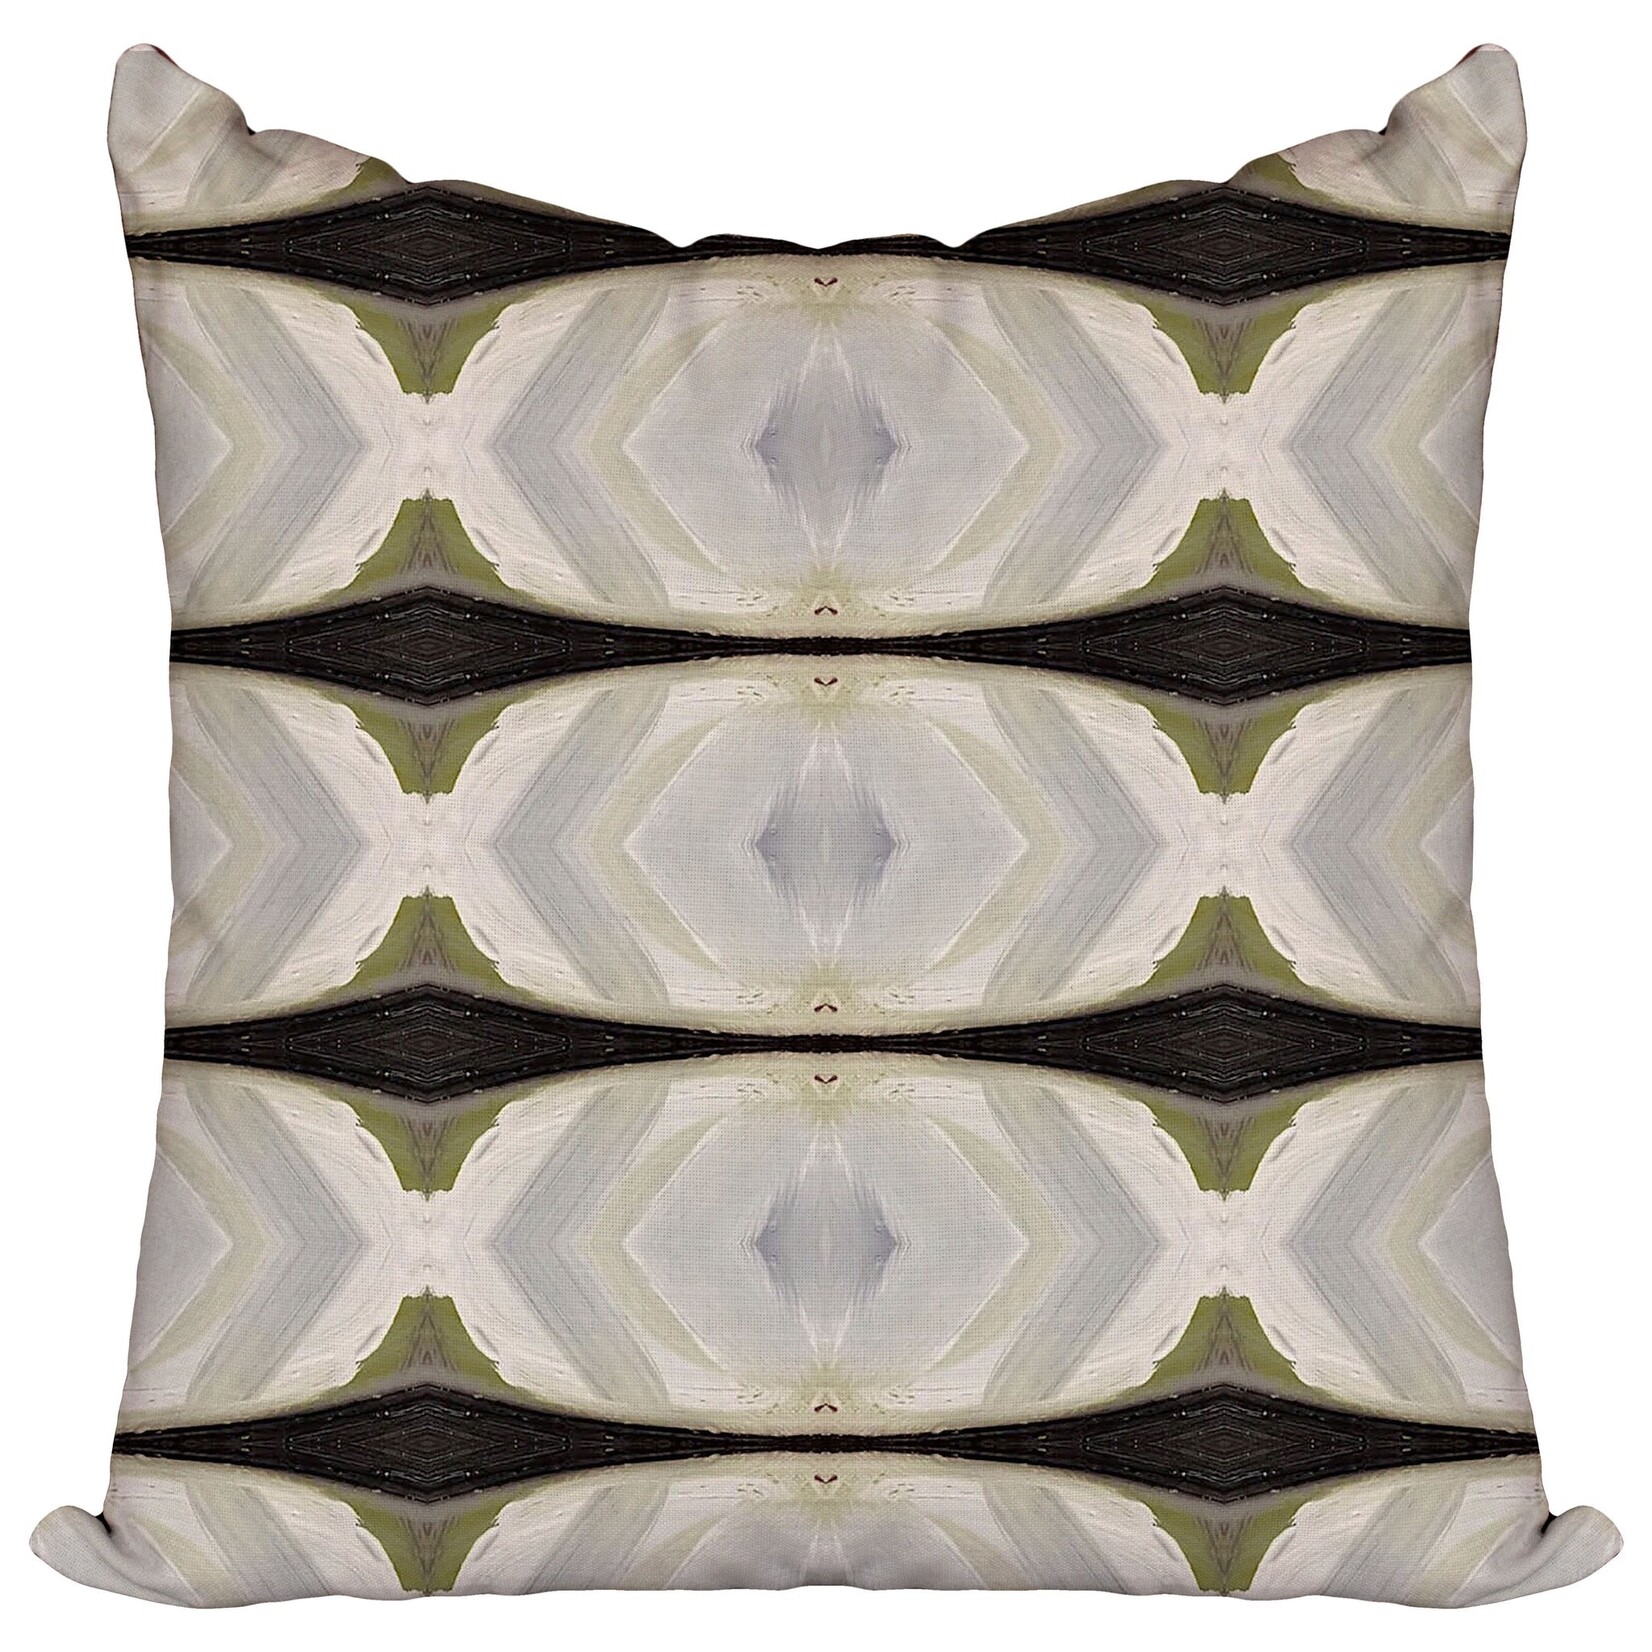 Pitted Olives Long Pillow 18" x 52"